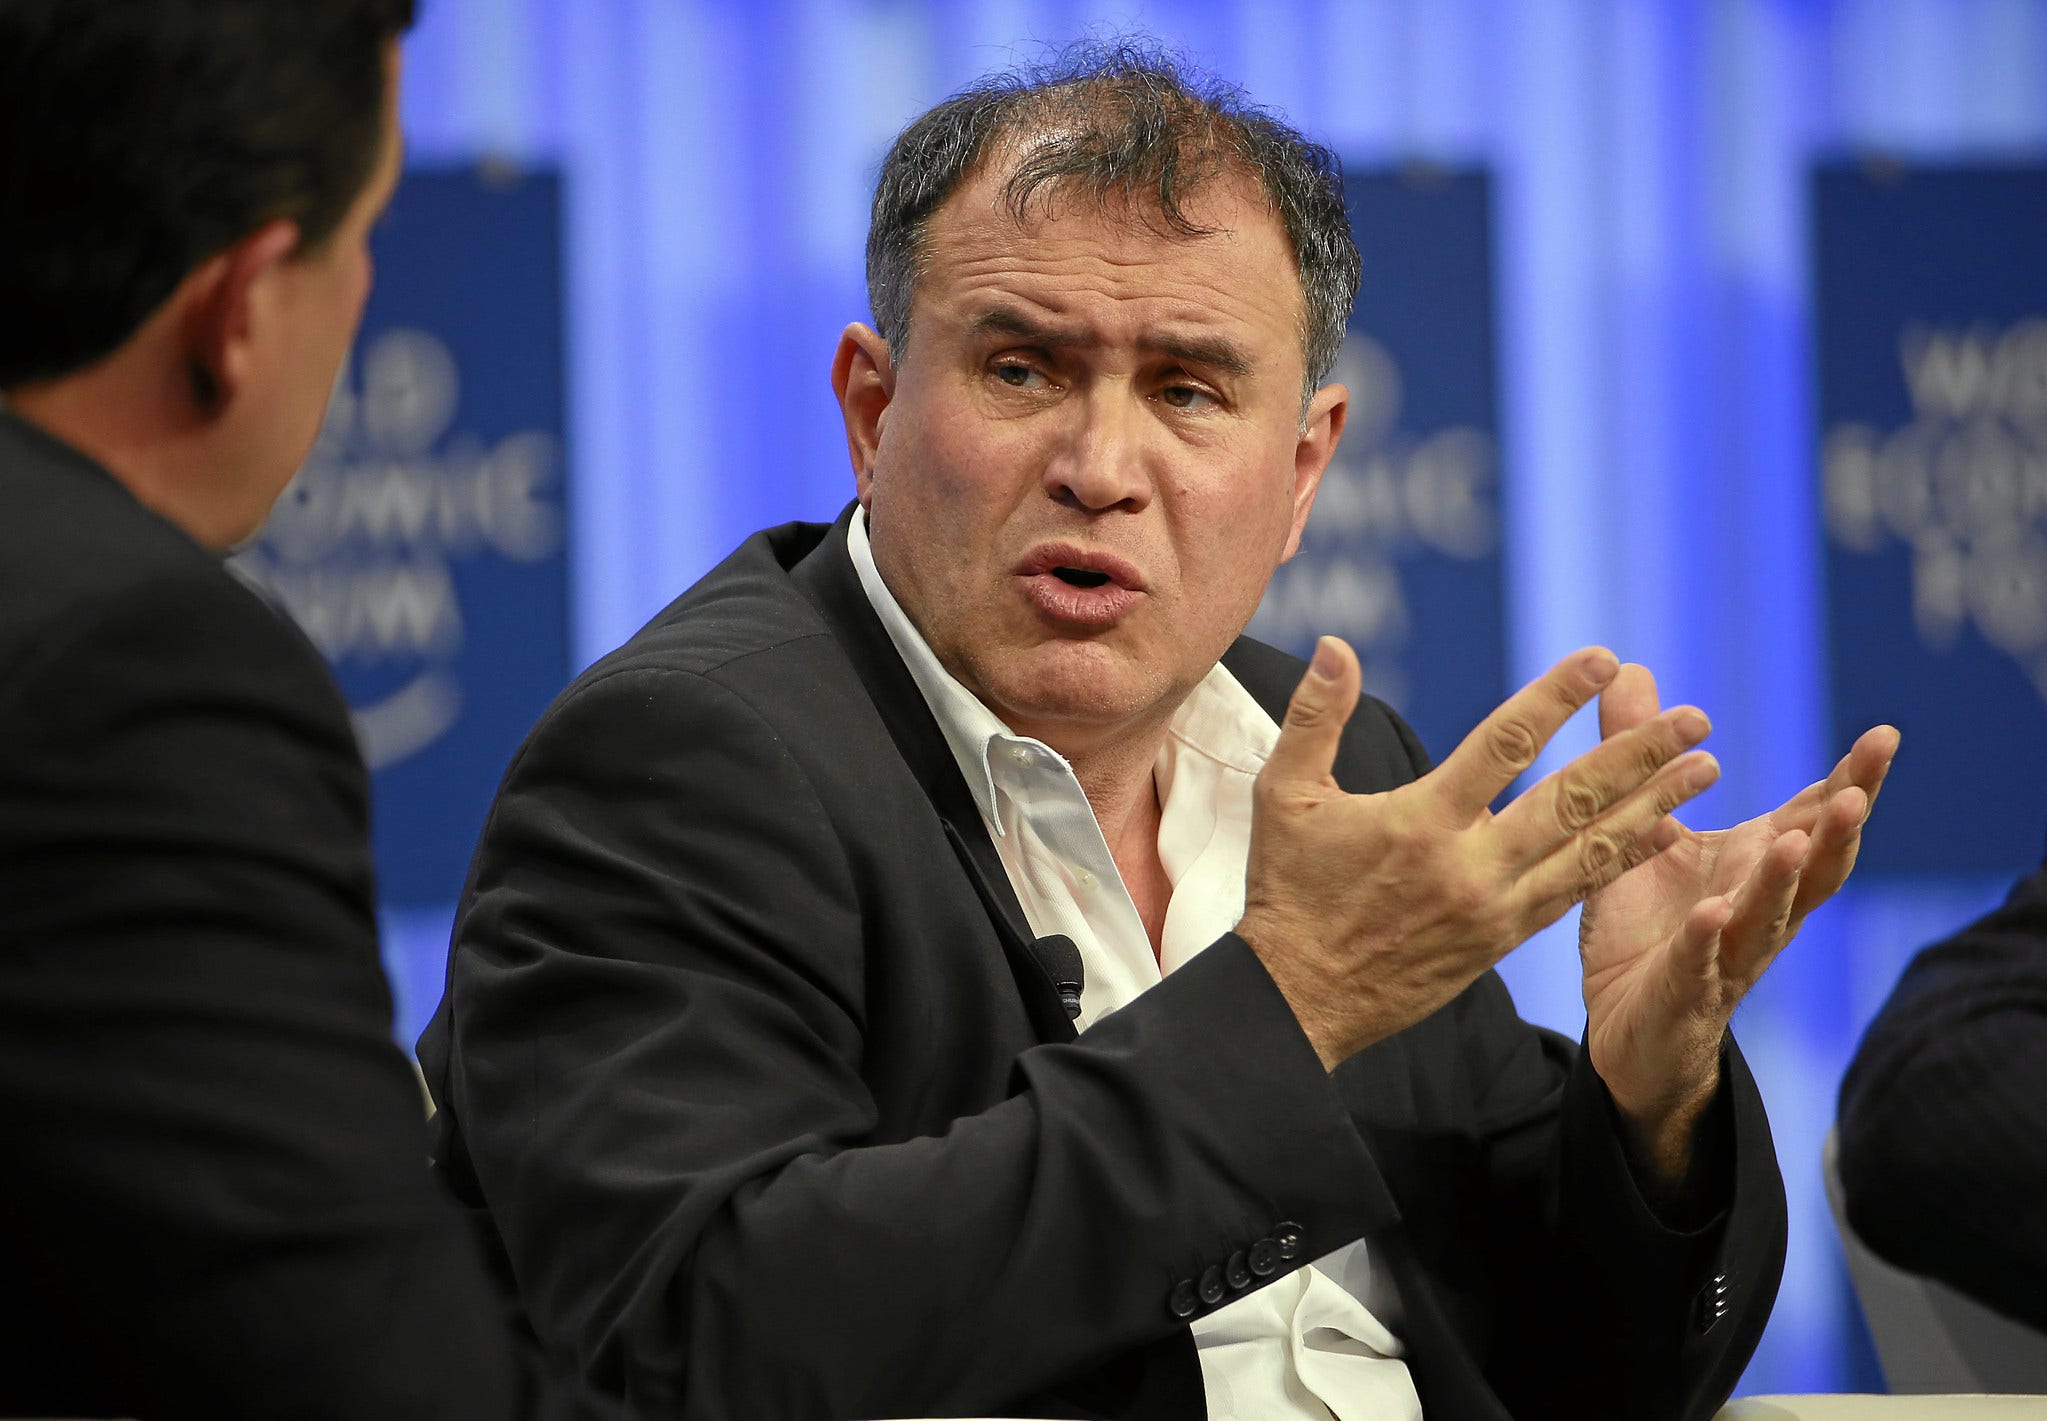 'Dr. Doom' Nouriel Roubini Reacts To FTX Drama: 'Who Will Bail Out Binance When House Of Card Collapses?'